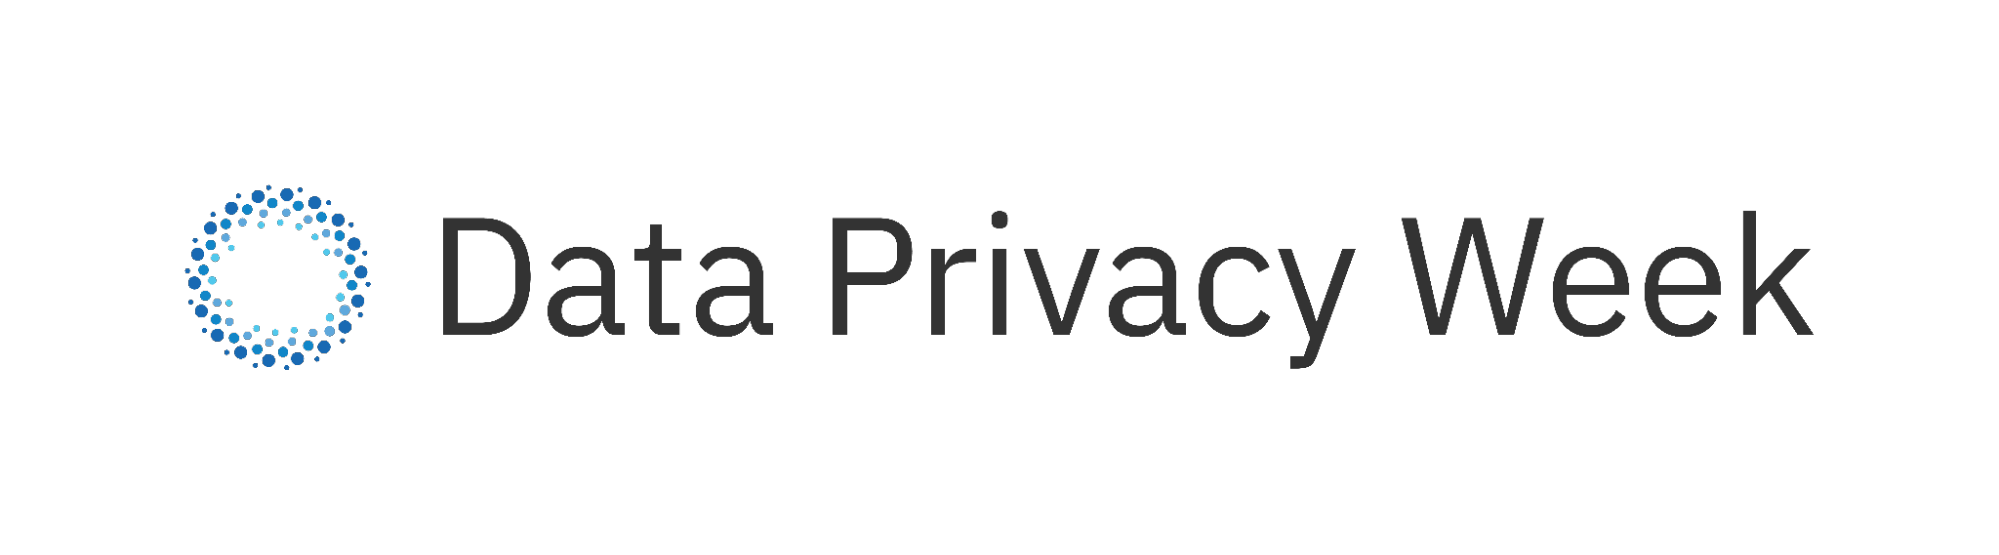 Data Privacy Week is Almost Here. What Does Data Privacy Mean to You?